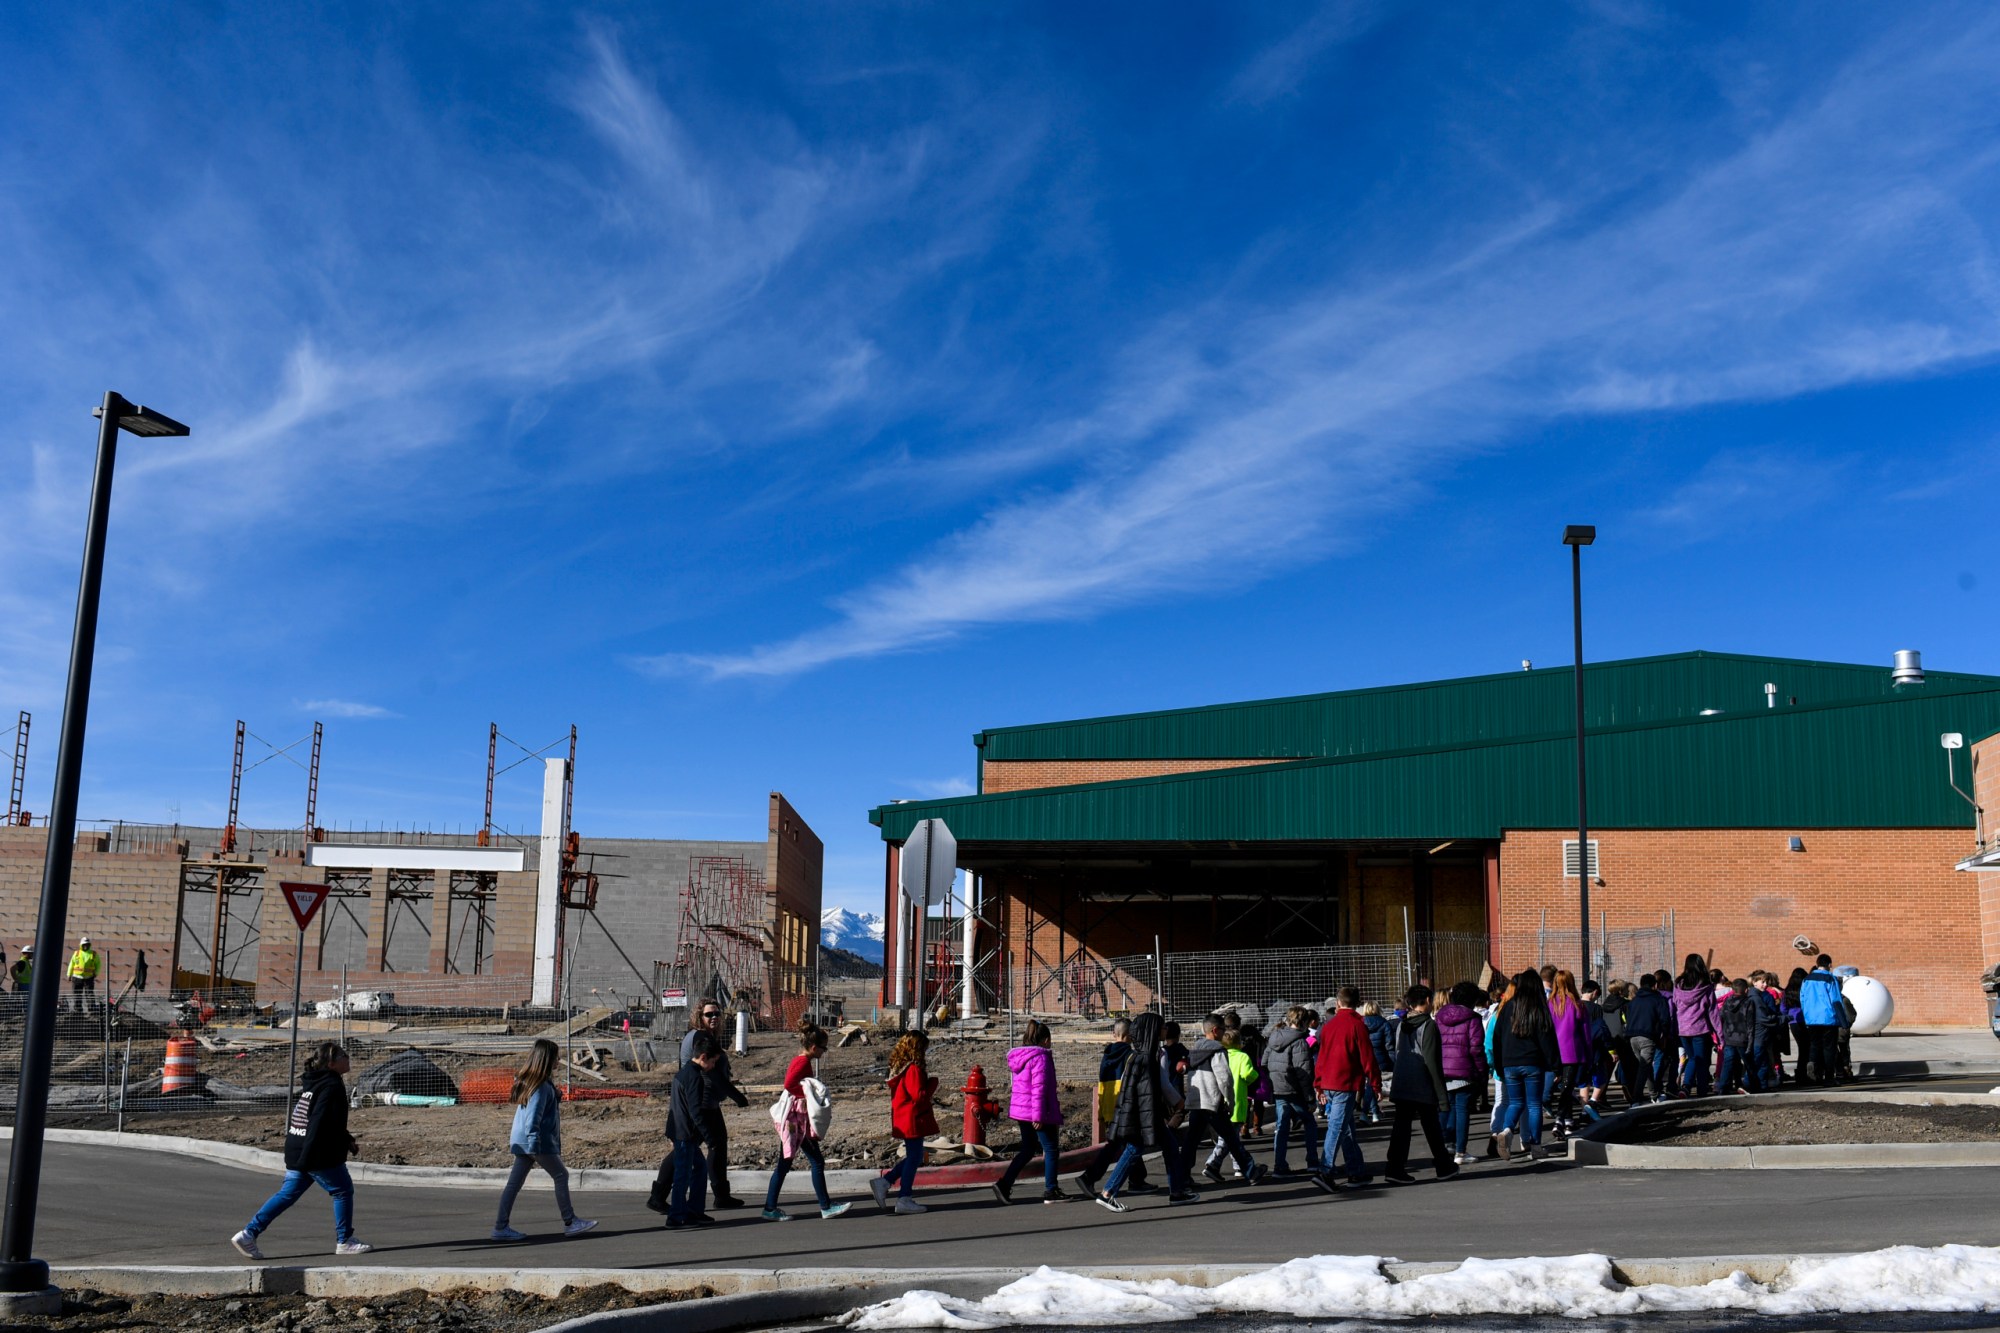 Students walk back to class as construction crews work on the wellness center and gymnasium additions at Primero school in Weston, CO. (Getty/AAron Ontiveroz)